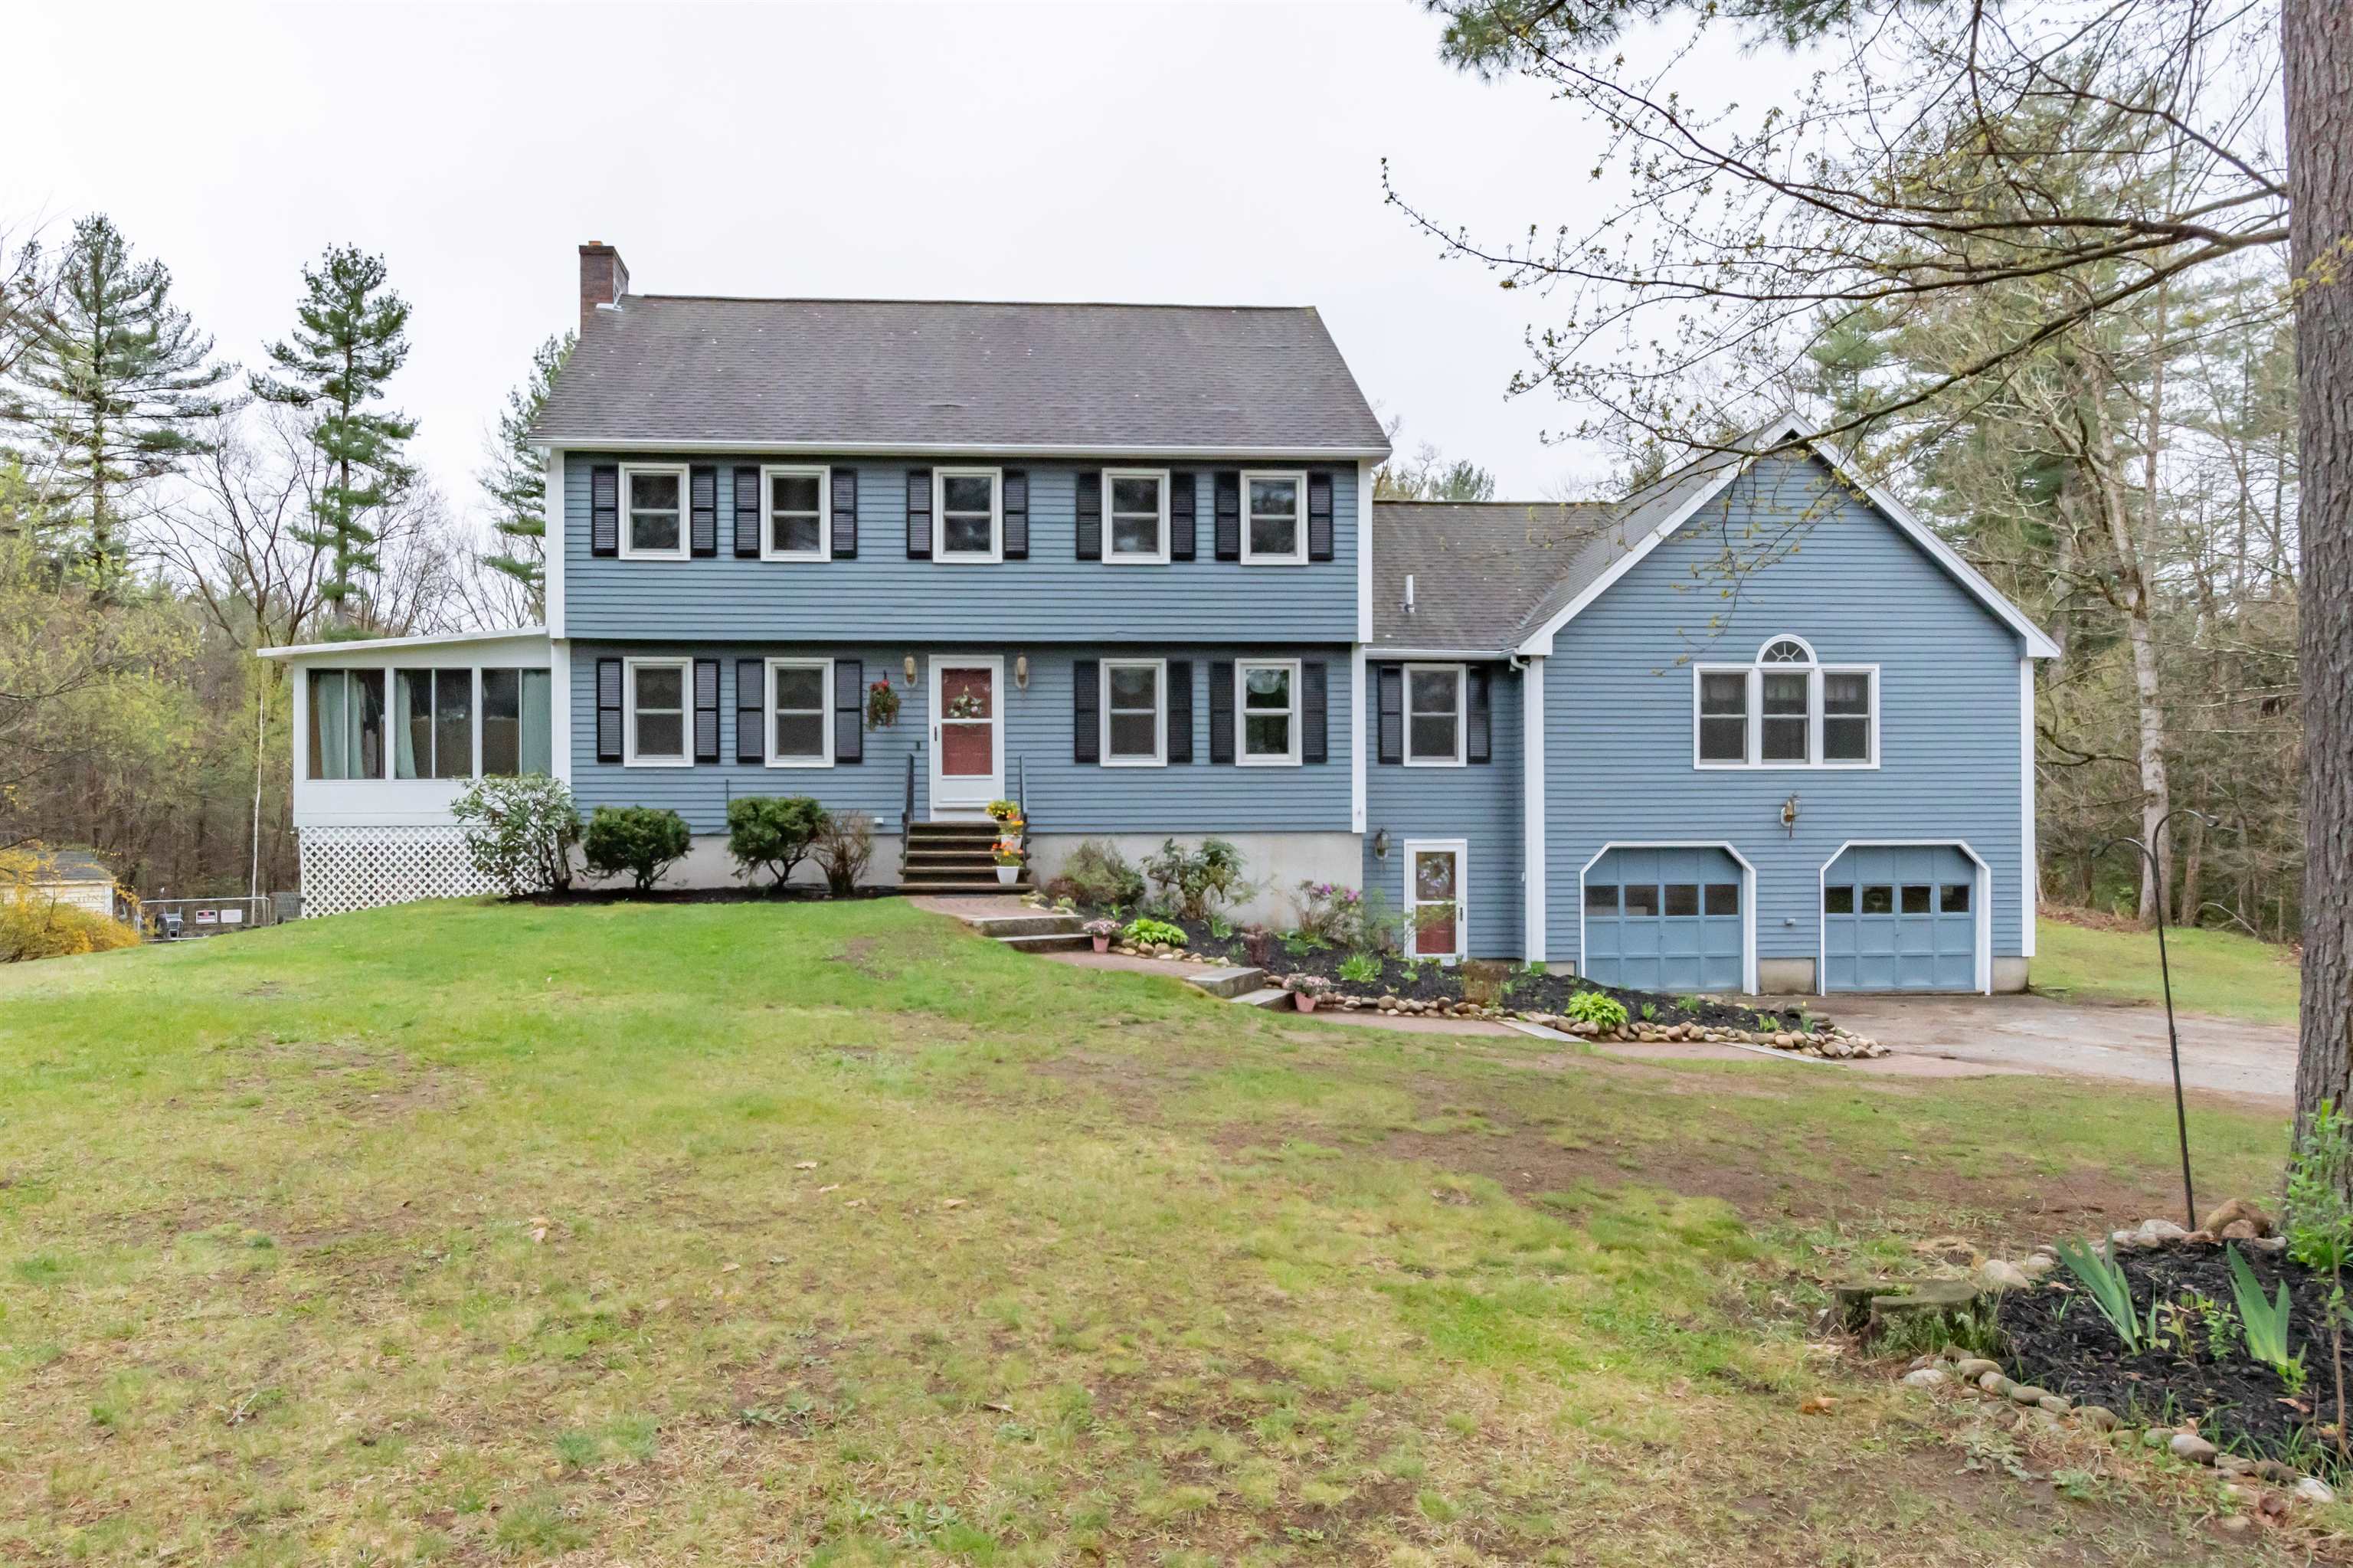 Presenting the fabulous Snow Pond Farm in sought after Windham. This unique 5 bedroom property (with in-law potential) on 3.5 aces offers all the space usually found in more rural areas. Enjoy morning coffee on the deck or sun porch overlooking a true outdoor haven. Next to Beaver Brook, you’ll find a barn and fenced area designed for large animals and chickens. Home to only one family, the property has been meticulously cared for. Fresh paint inside and out, gleaming newly refinished hardwood floors, new carpet and upgraded windows make this move-in ready! Living room with fireplace, dining room and kitchen nook accommodate both full scale entertaining and the casual family lifestyle. On the right side is a fantastic set up for a potential in-law. Private entrance into the finished basement with stairs leading to a first floor ¾ bathroom, large living space and additional room behind. Located a short distance from 93, this home is a sanctuary just minutes from shopping, schools dining and only 45 minutes to Boston. In a class by itself! Welcome home . . . you won't want to leave.